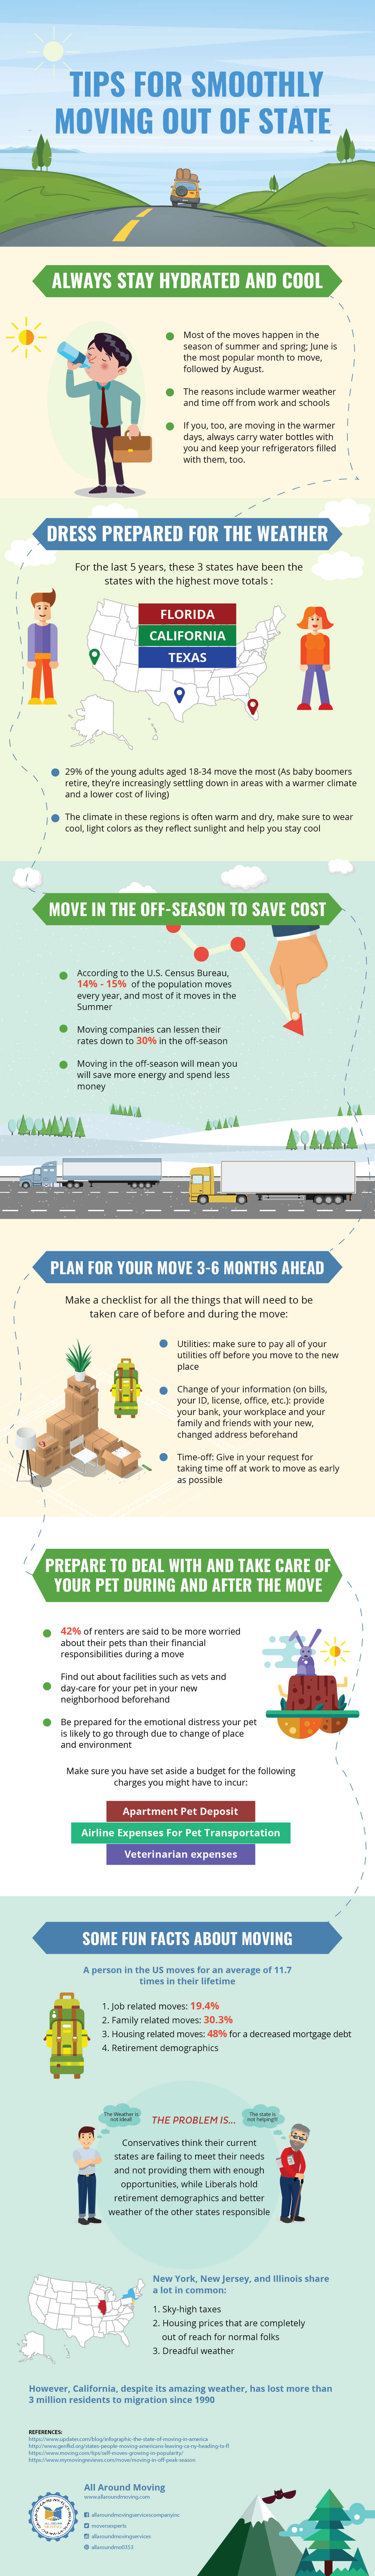 tip-for-smoothly-moving-out-of-state-infographic-plaza